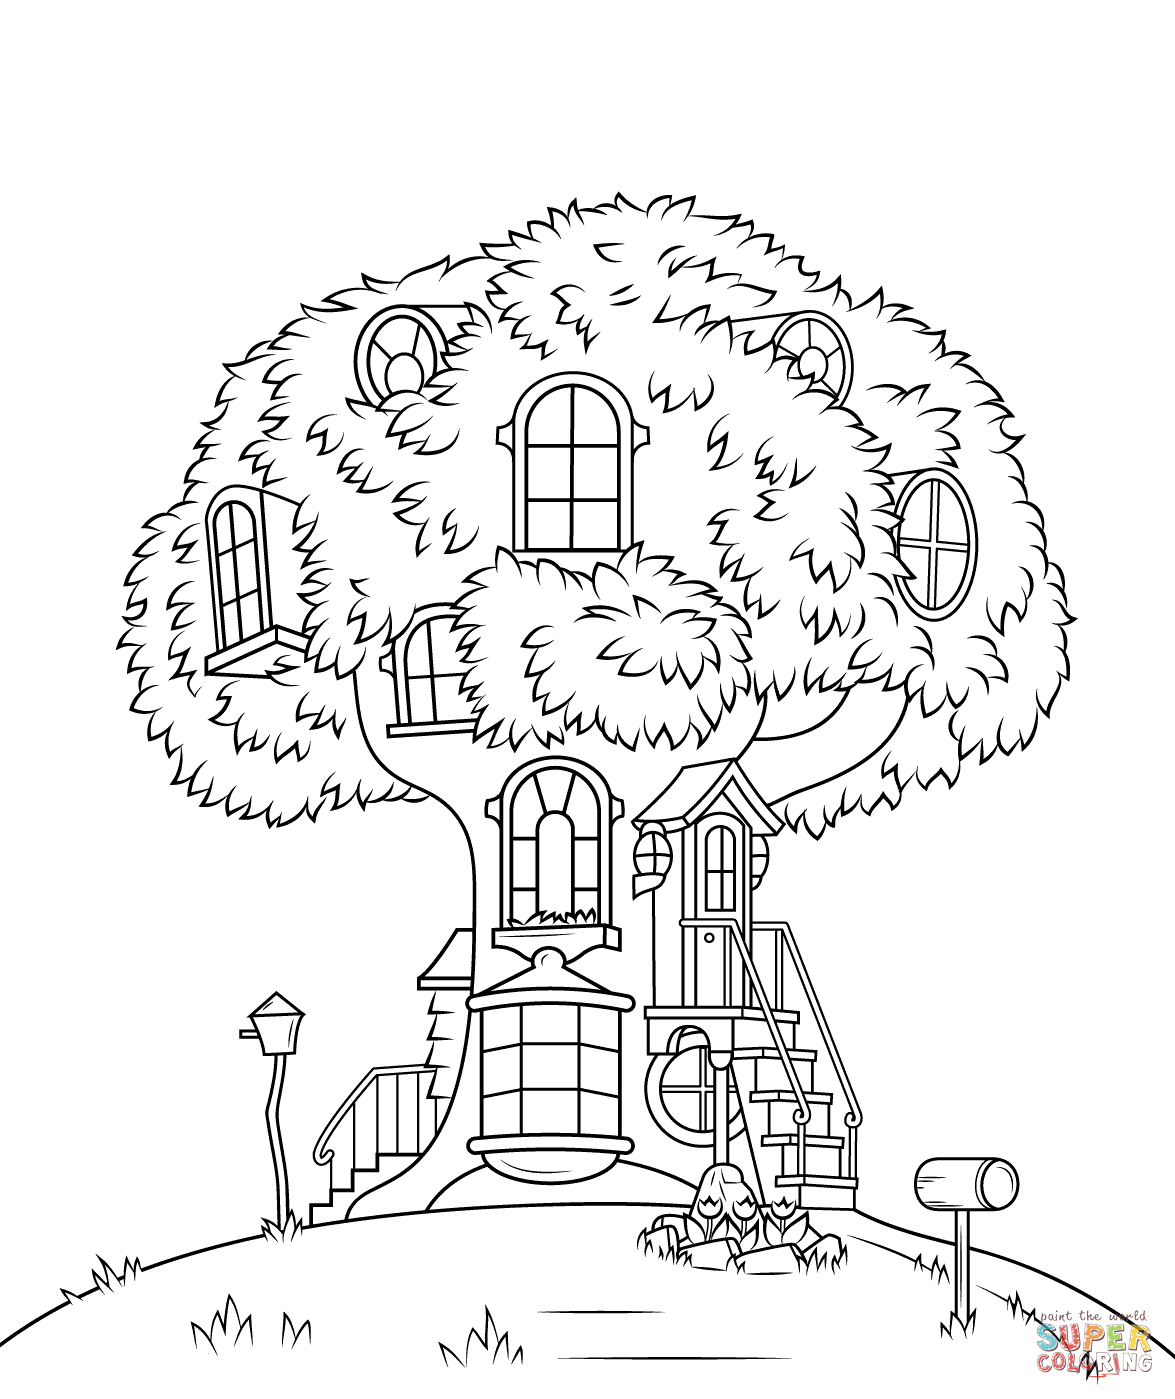 Berenstain Bears Treehouse coloring page | Free Printable Coloring ...